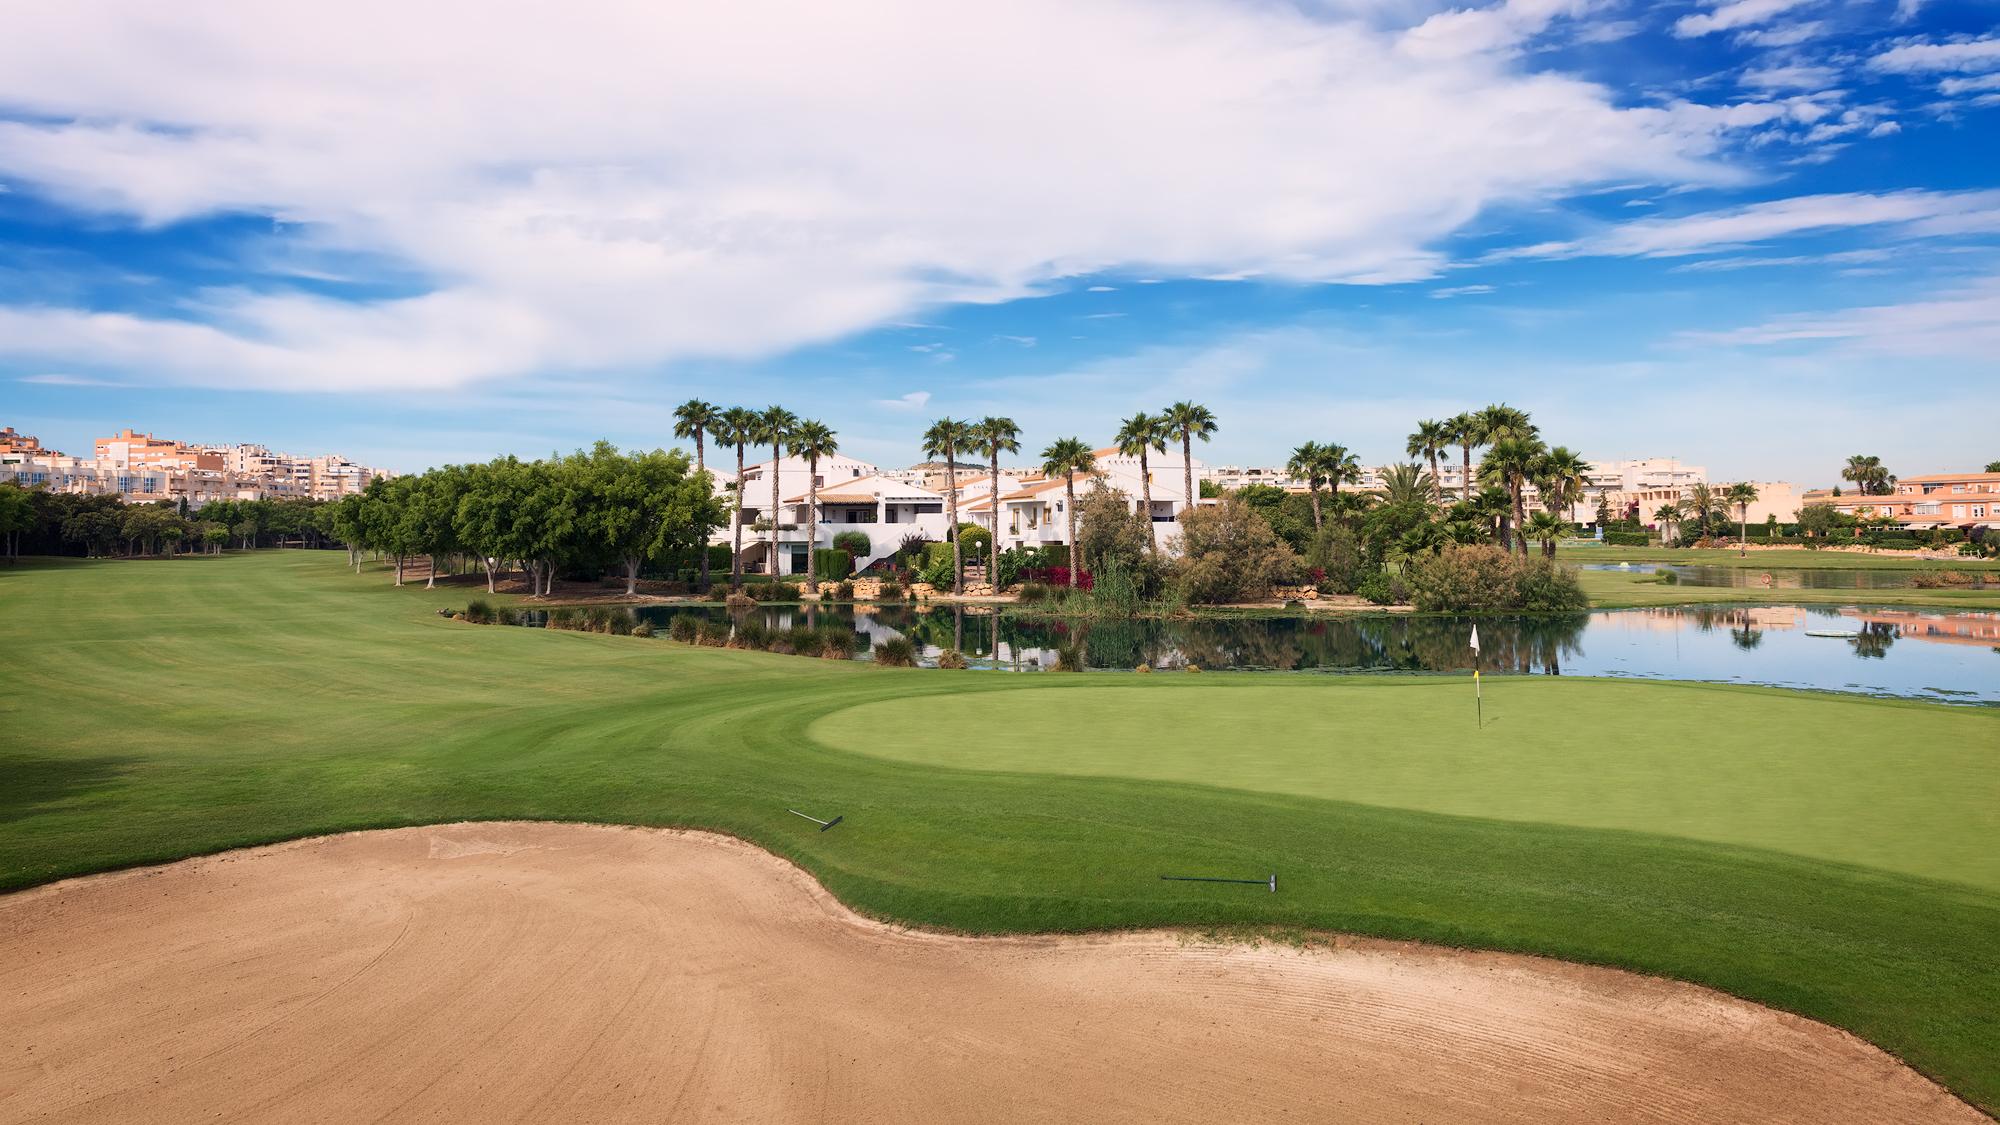 The Alicante Golf Club's beautiful golf course within amazing Costa Blanca.